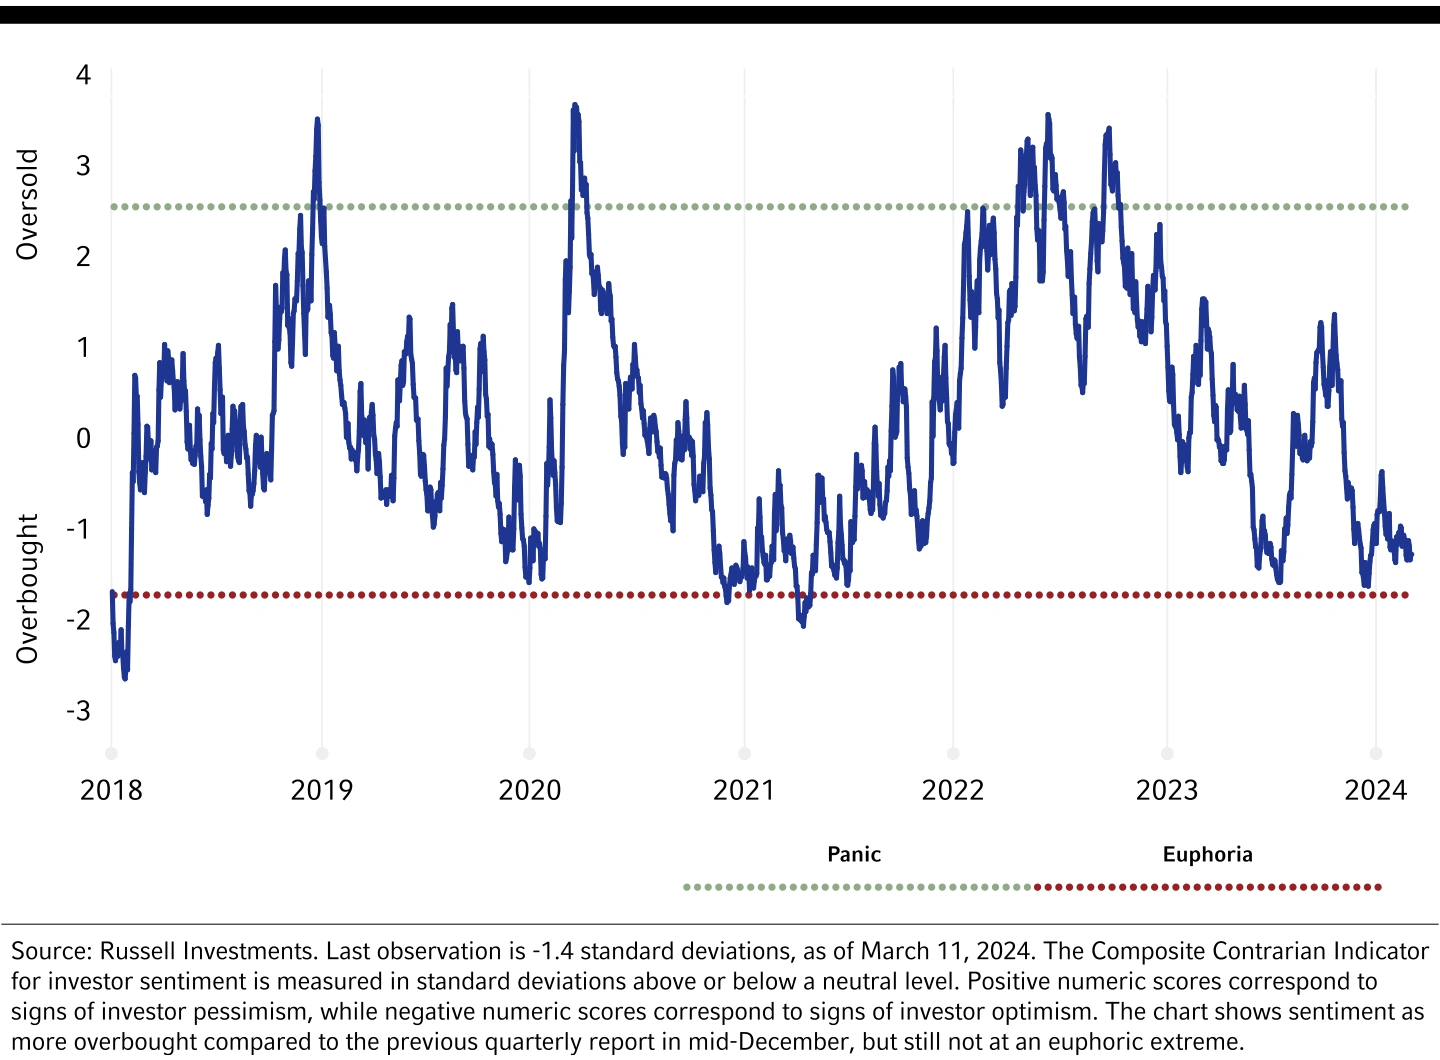 Composite Contrarian Indicator: Investor Sentiment Not Yet at Euphoric Extreme